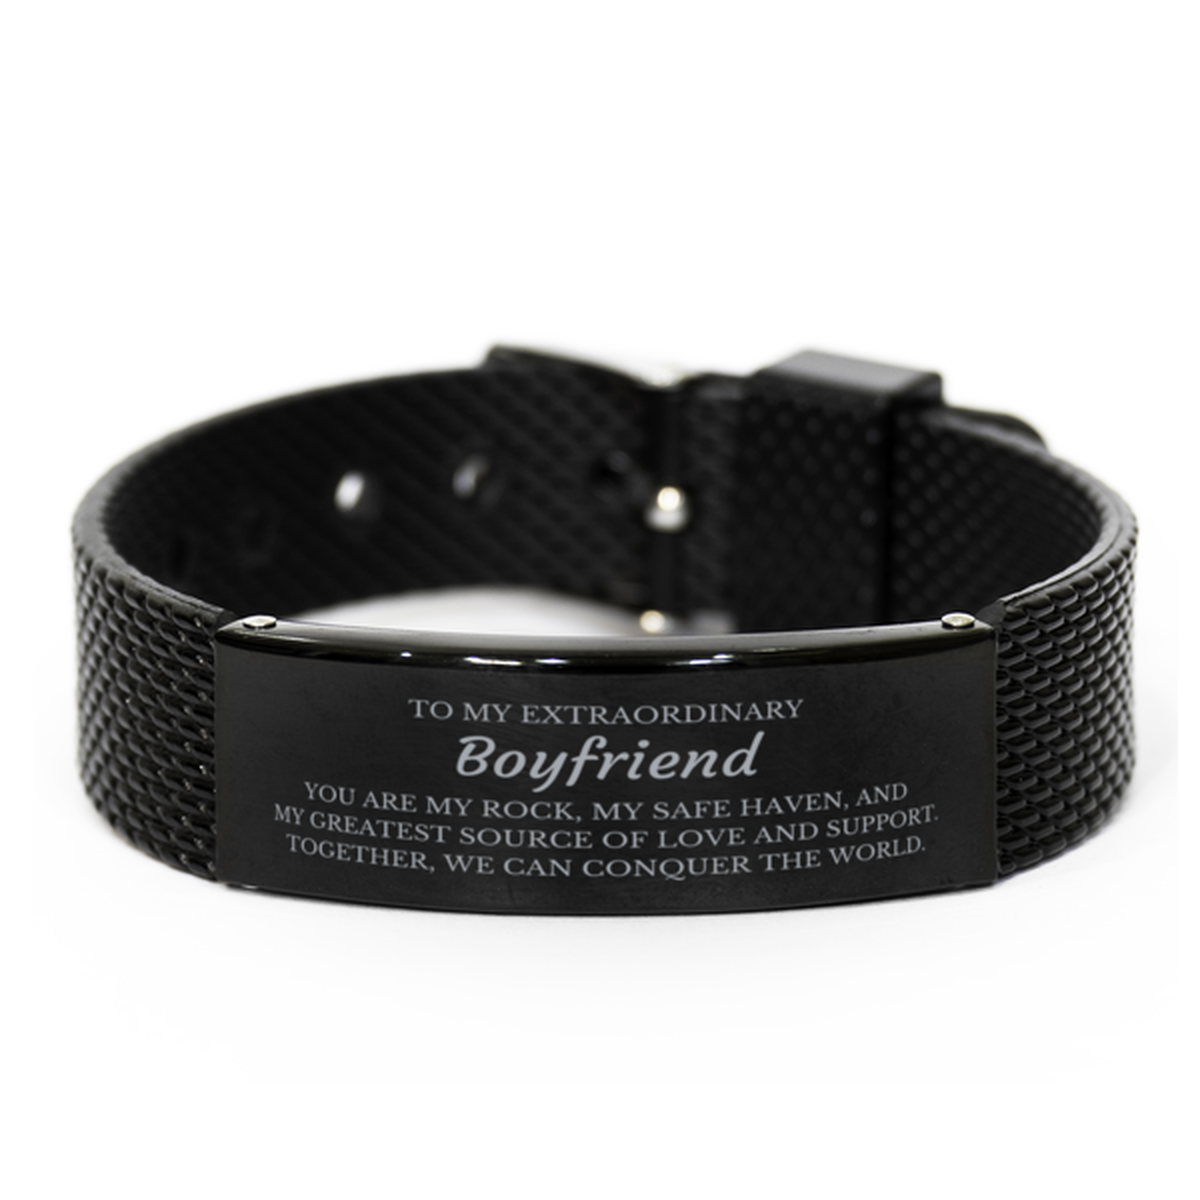 To My Extraordinary Boyfriend Gifts, Together, we can conquer the world, Birthday Black Shark Mesh Bracelet For Boyfriend, Christmas Gifts For Boyfriend